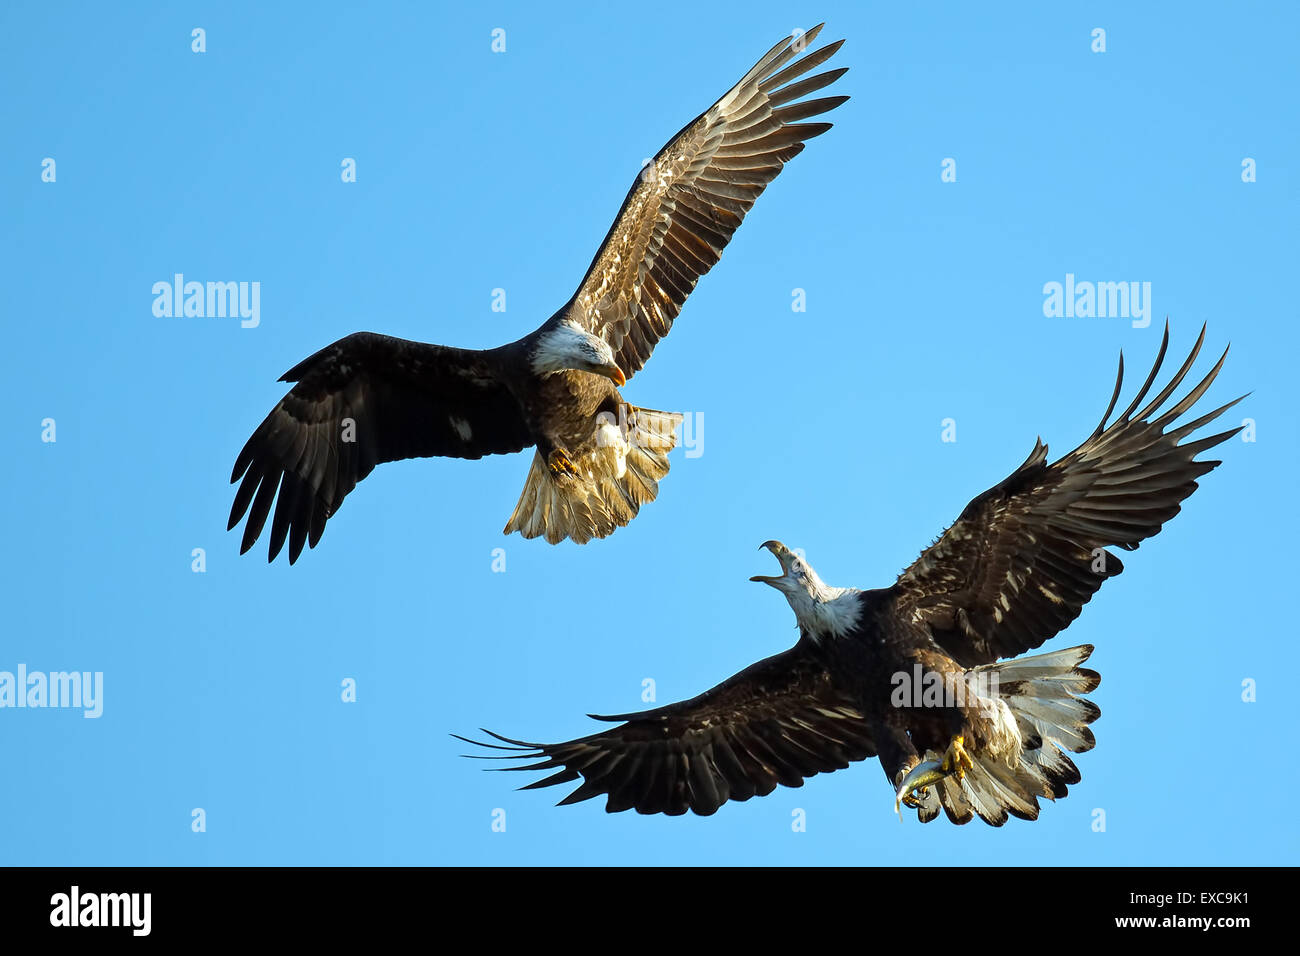 American Bald Eagle Schlacht in Luft Stockfoto